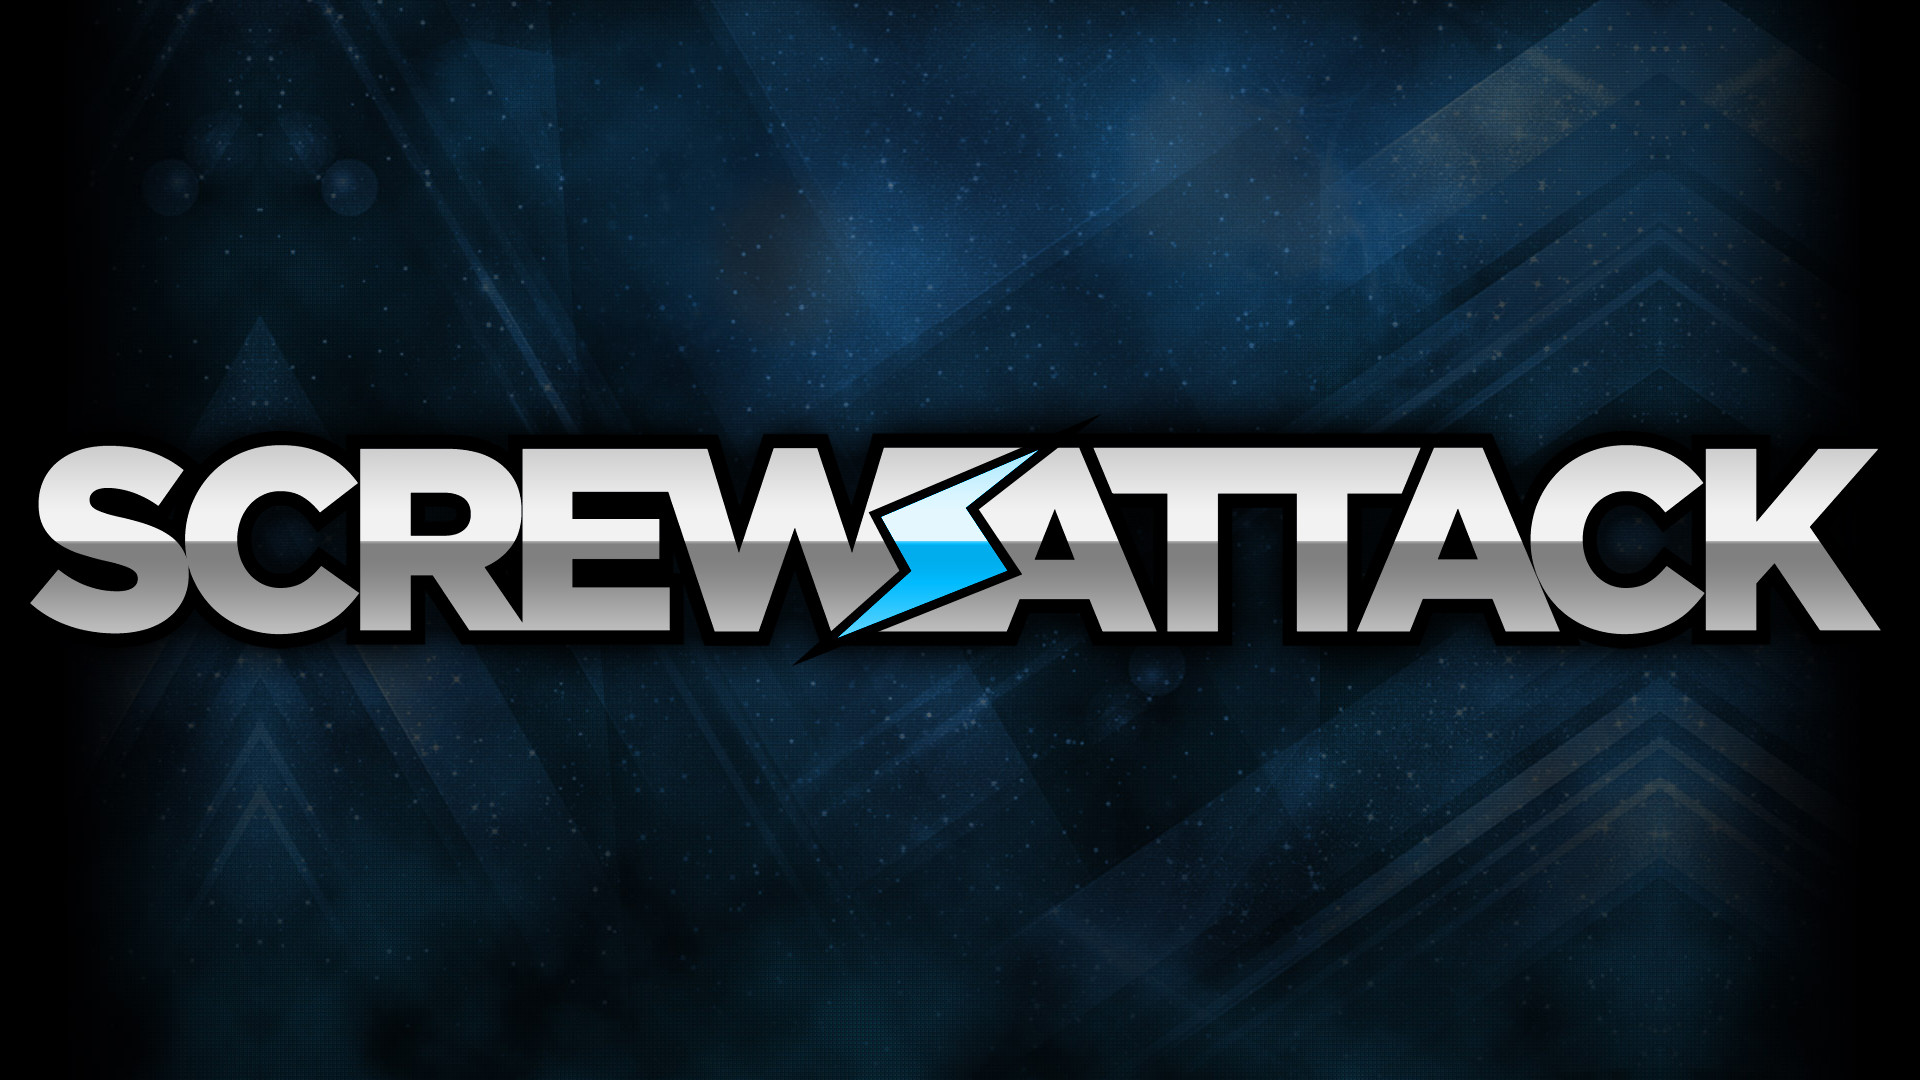 List Of Screwattack Features Powered